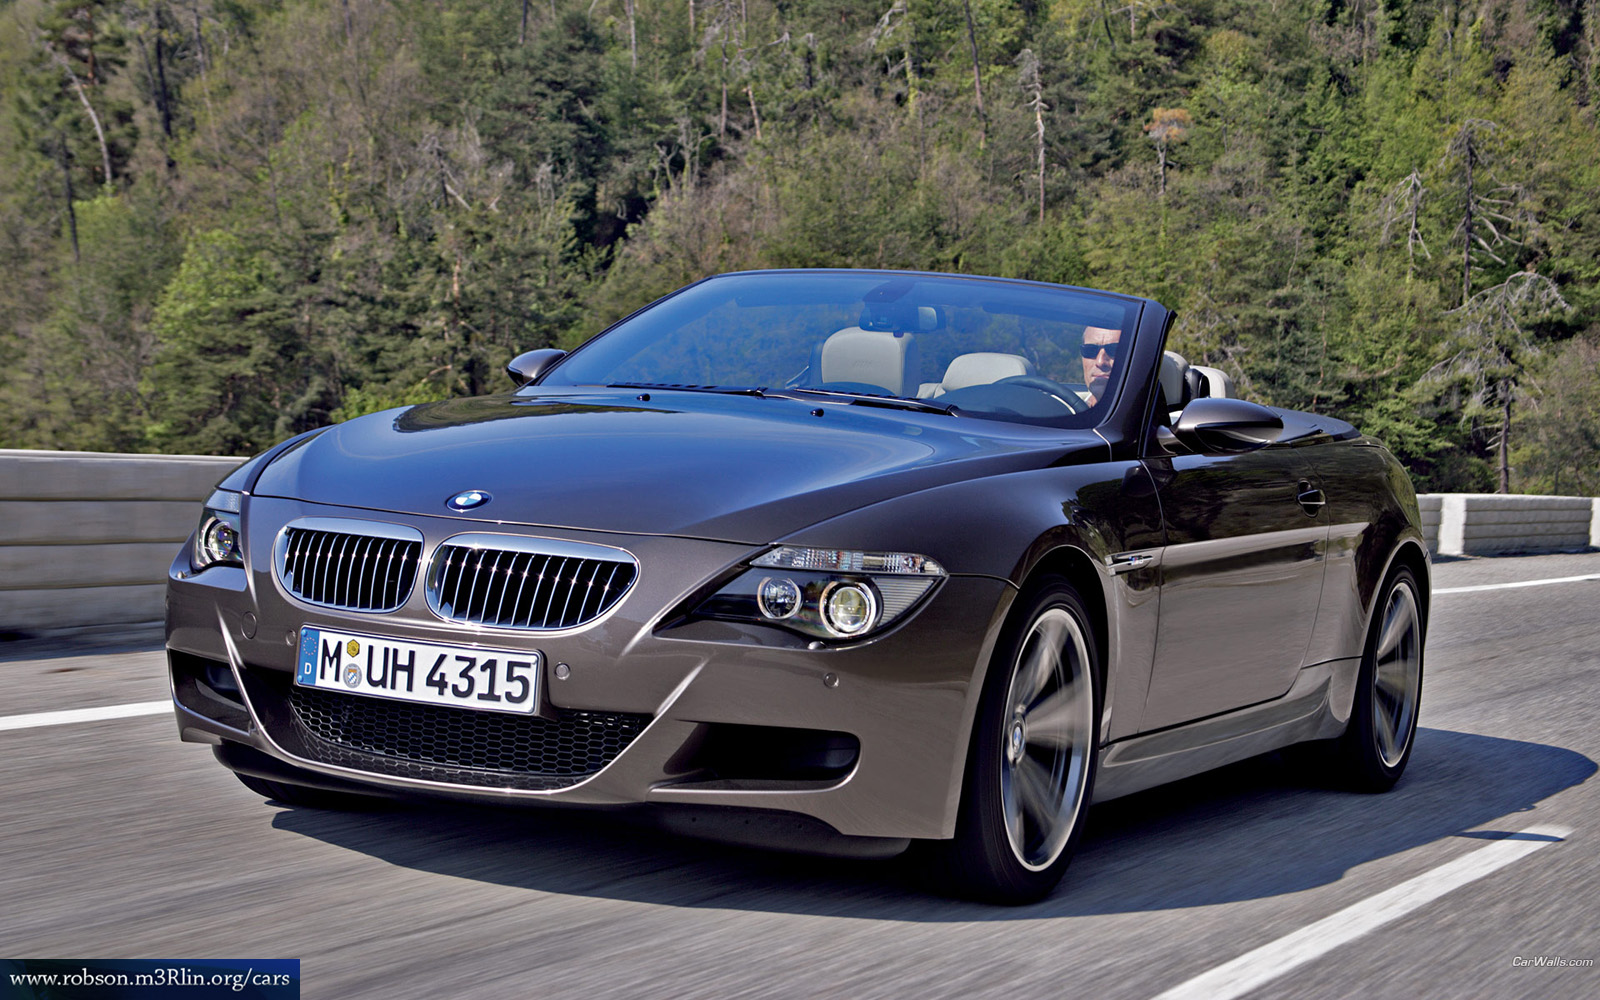 BMW M6 Cabrio E64 | Cars - Pictures & Wallpapers, Automotive News ...